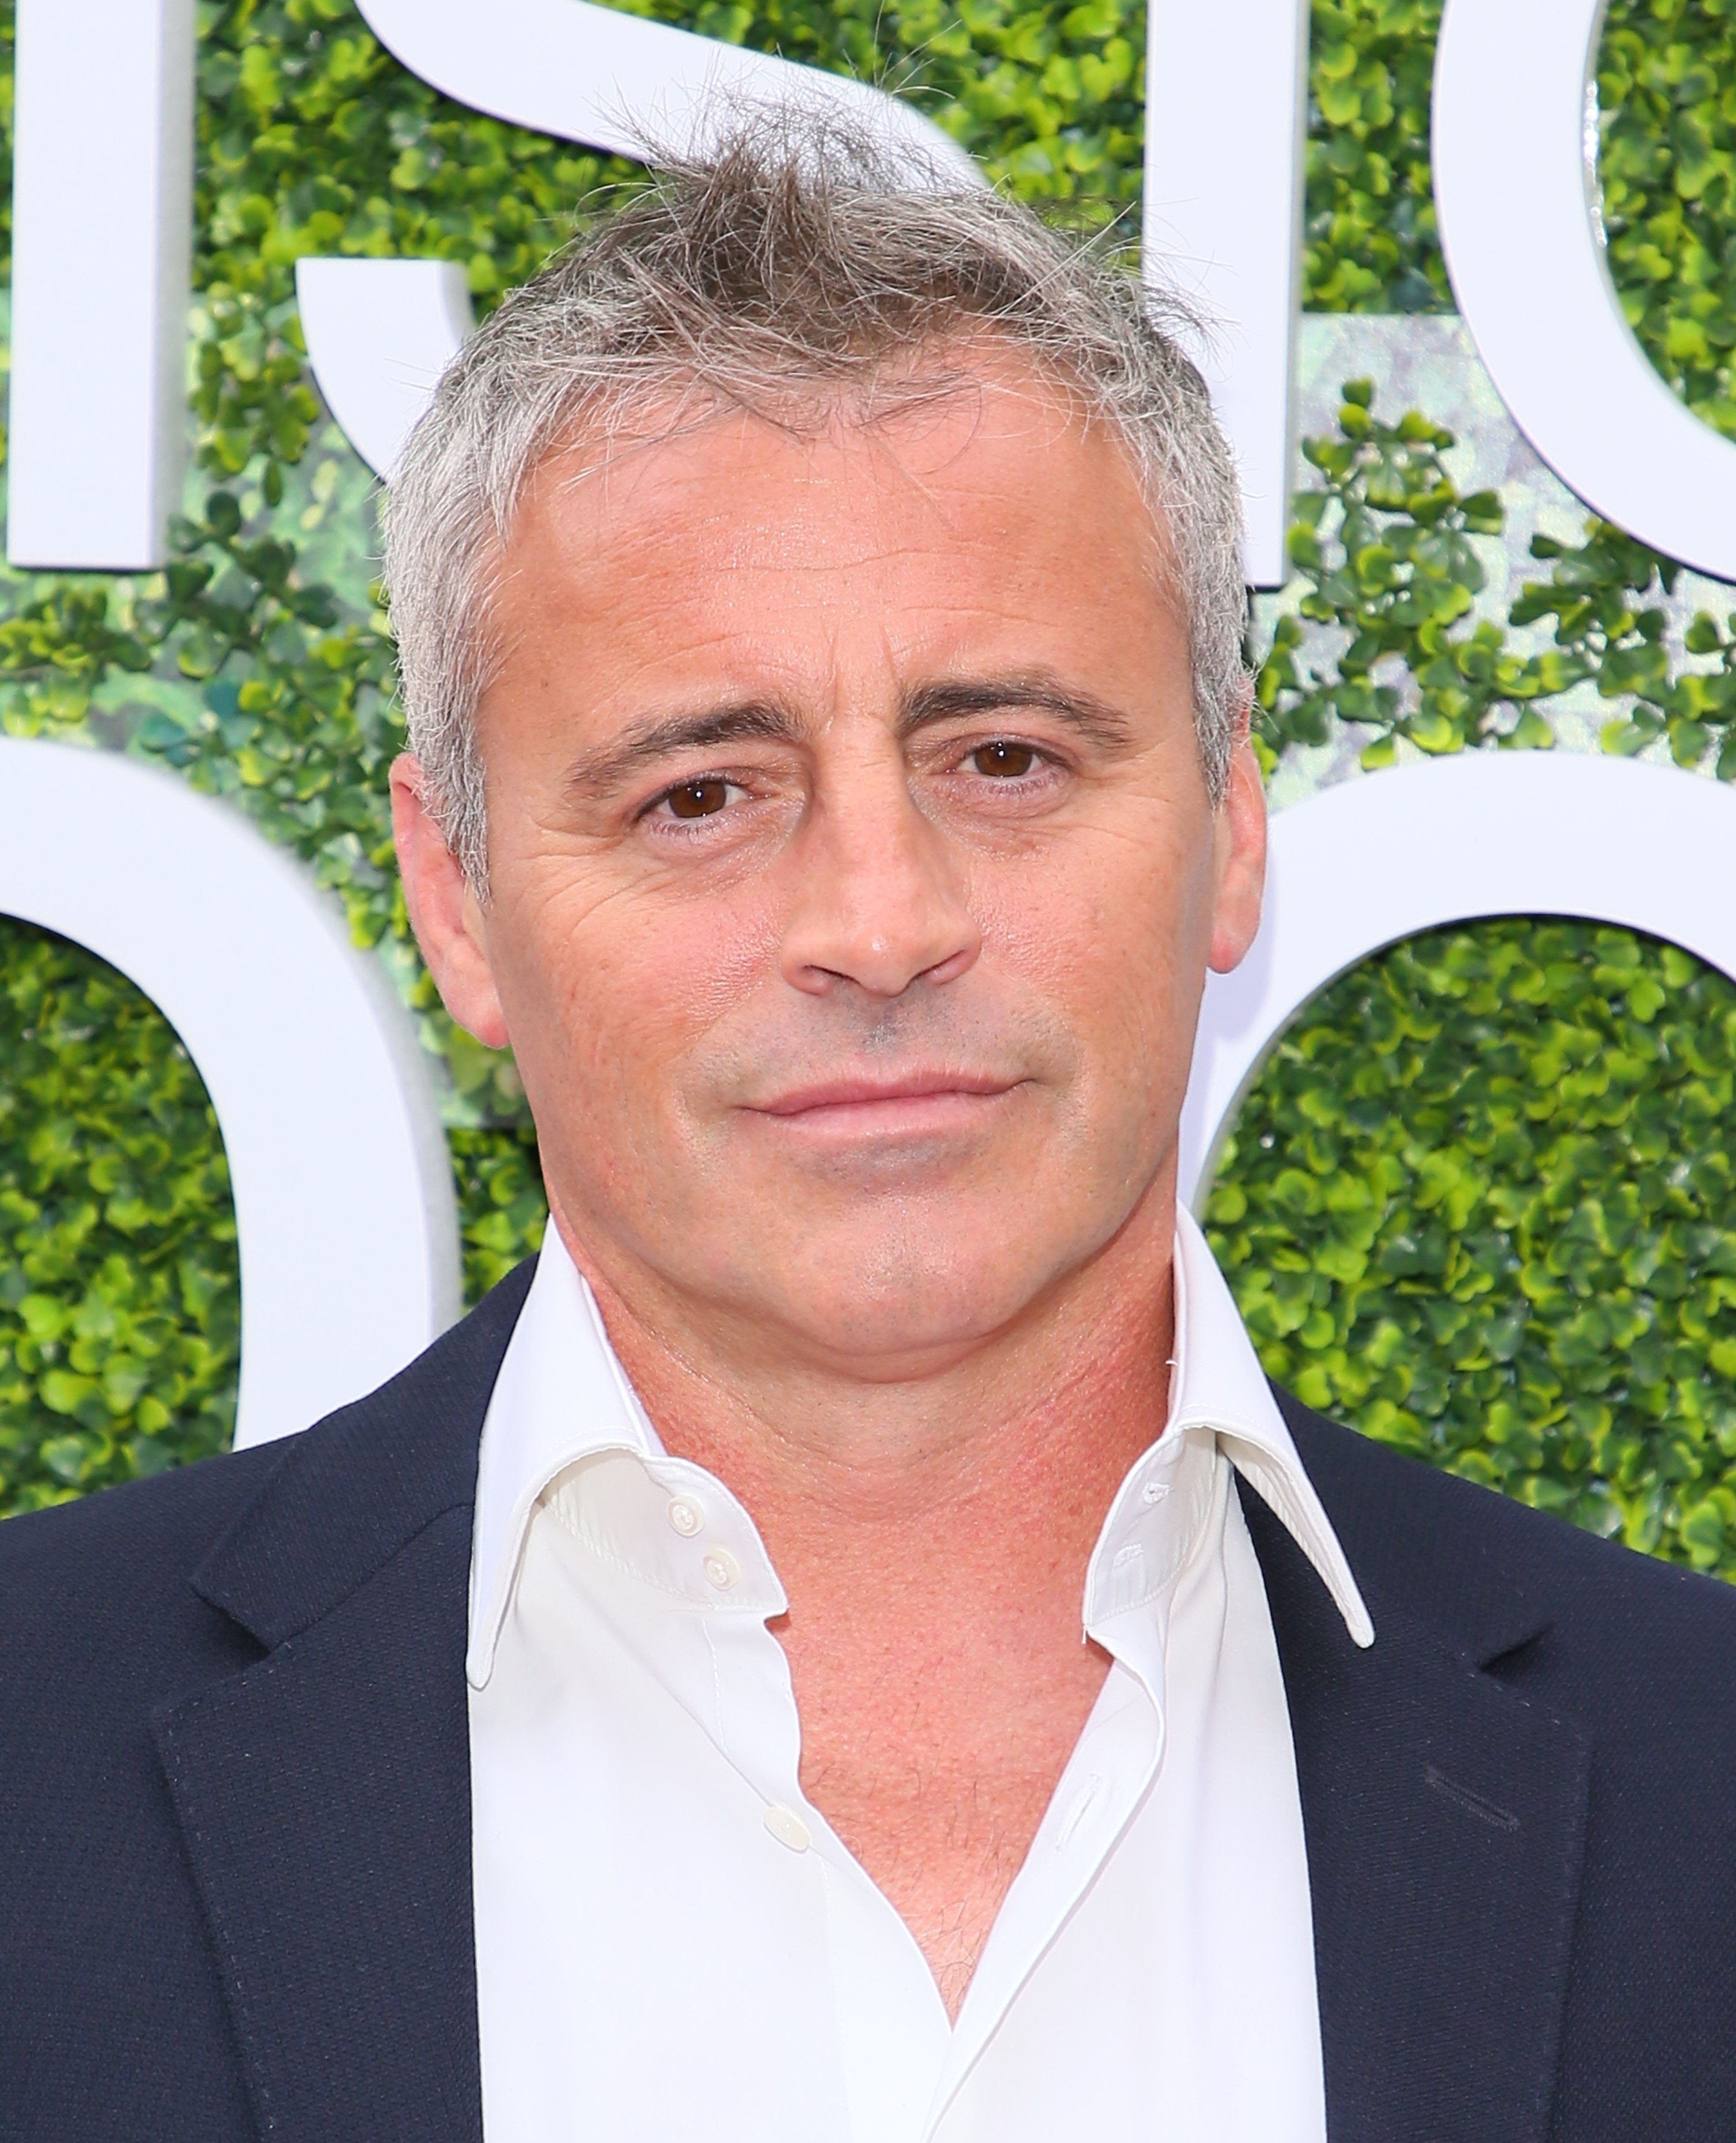 Matt LeBlanc attends the 2017 Summer TCA Tour – CBS Television Studios' Summer Soiree on August 1 in Studio City, California. | Source: Getty Images